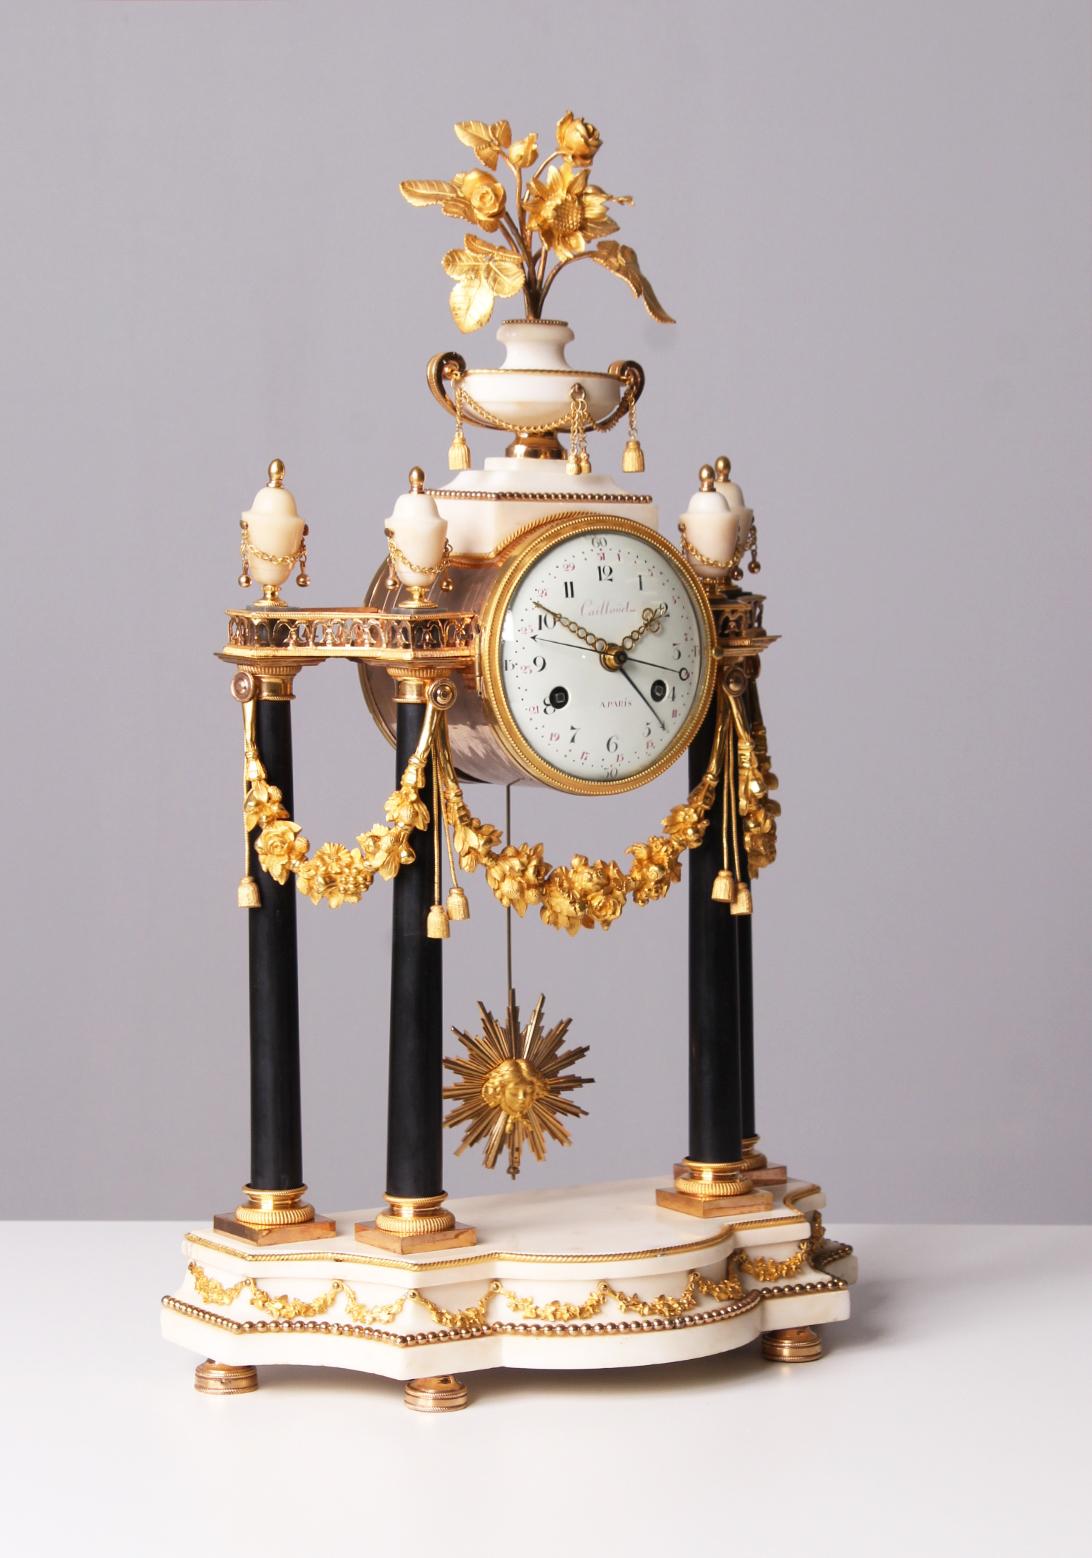 Large Louis XVI Portal mantel clock with date and seconds

Paris
Marble, fire-gilt bronze
Louis XVI c. 1790

Dimensions: H x W x D: 57 x 34 x 16 cm

Description:
Highly refined classical portal clock with detailed worked bronze and very